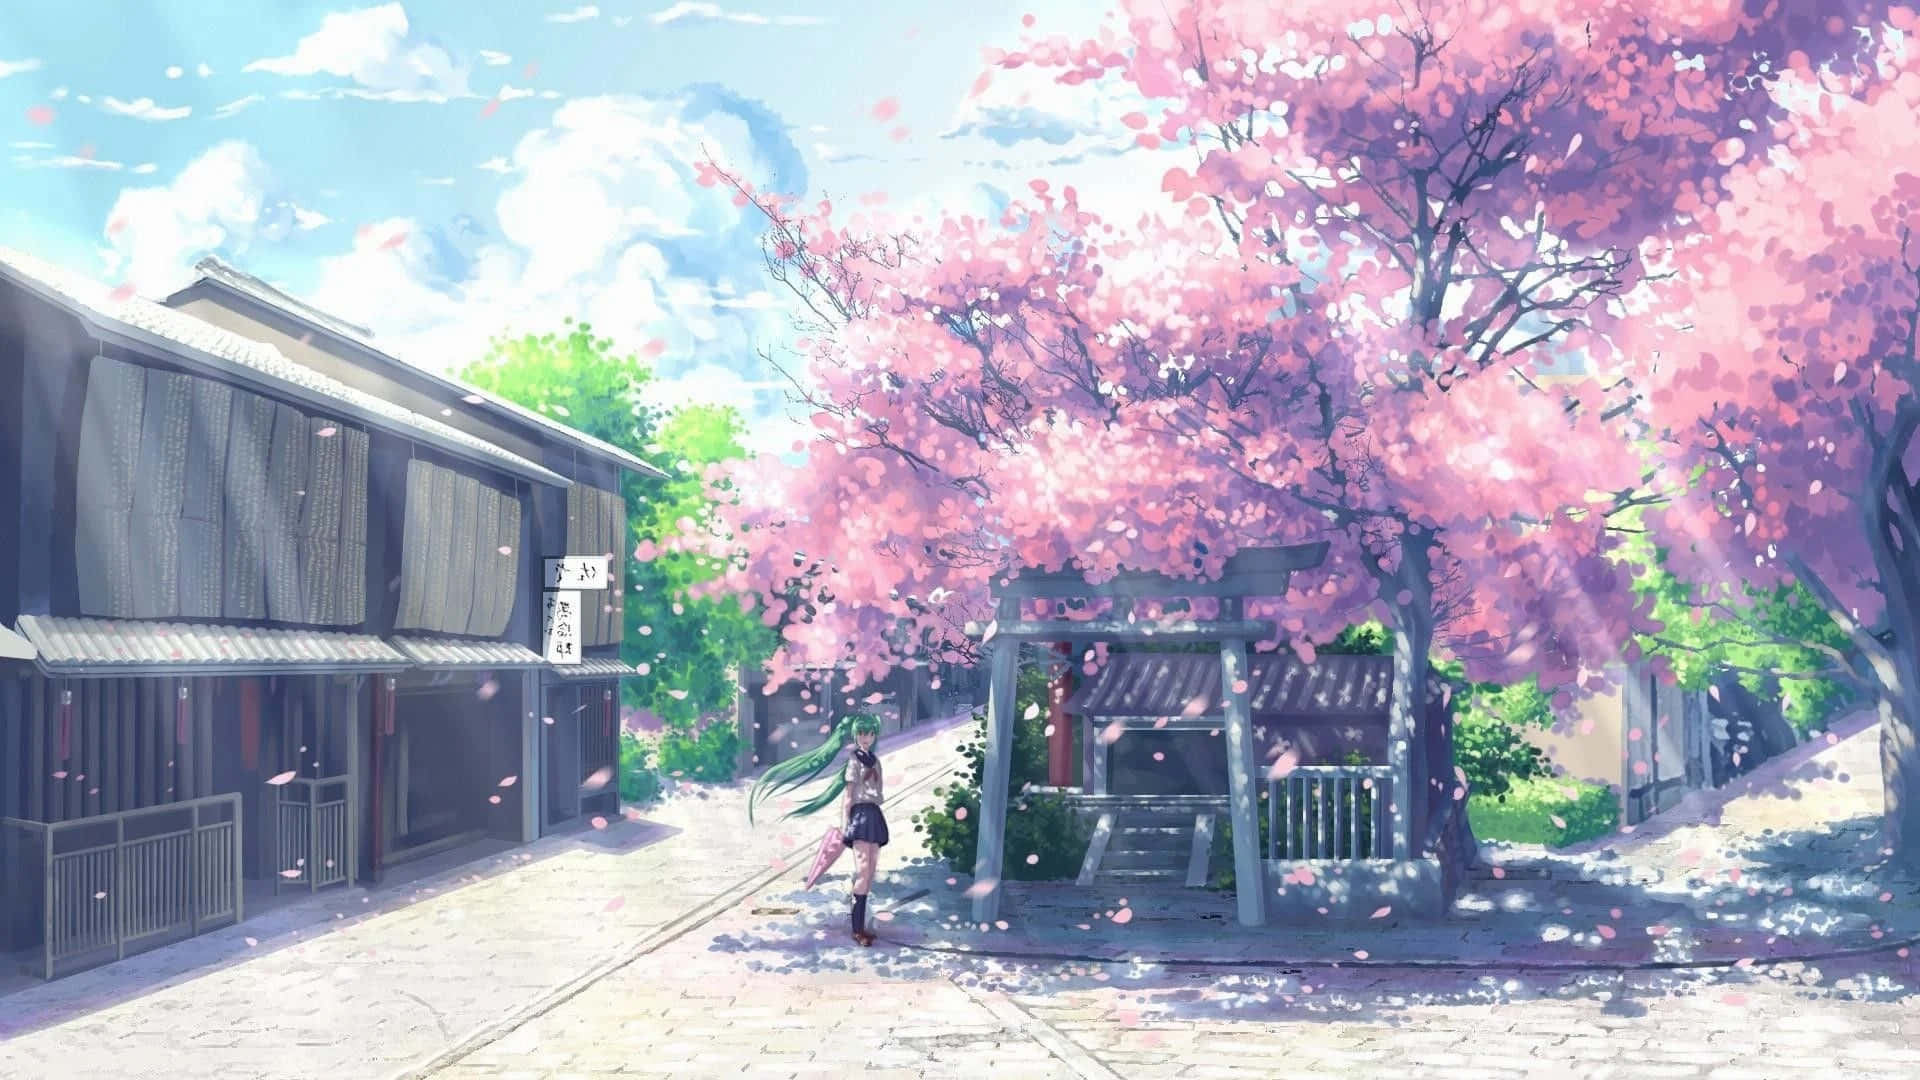 A Street With Pink Blossom Trees And A House